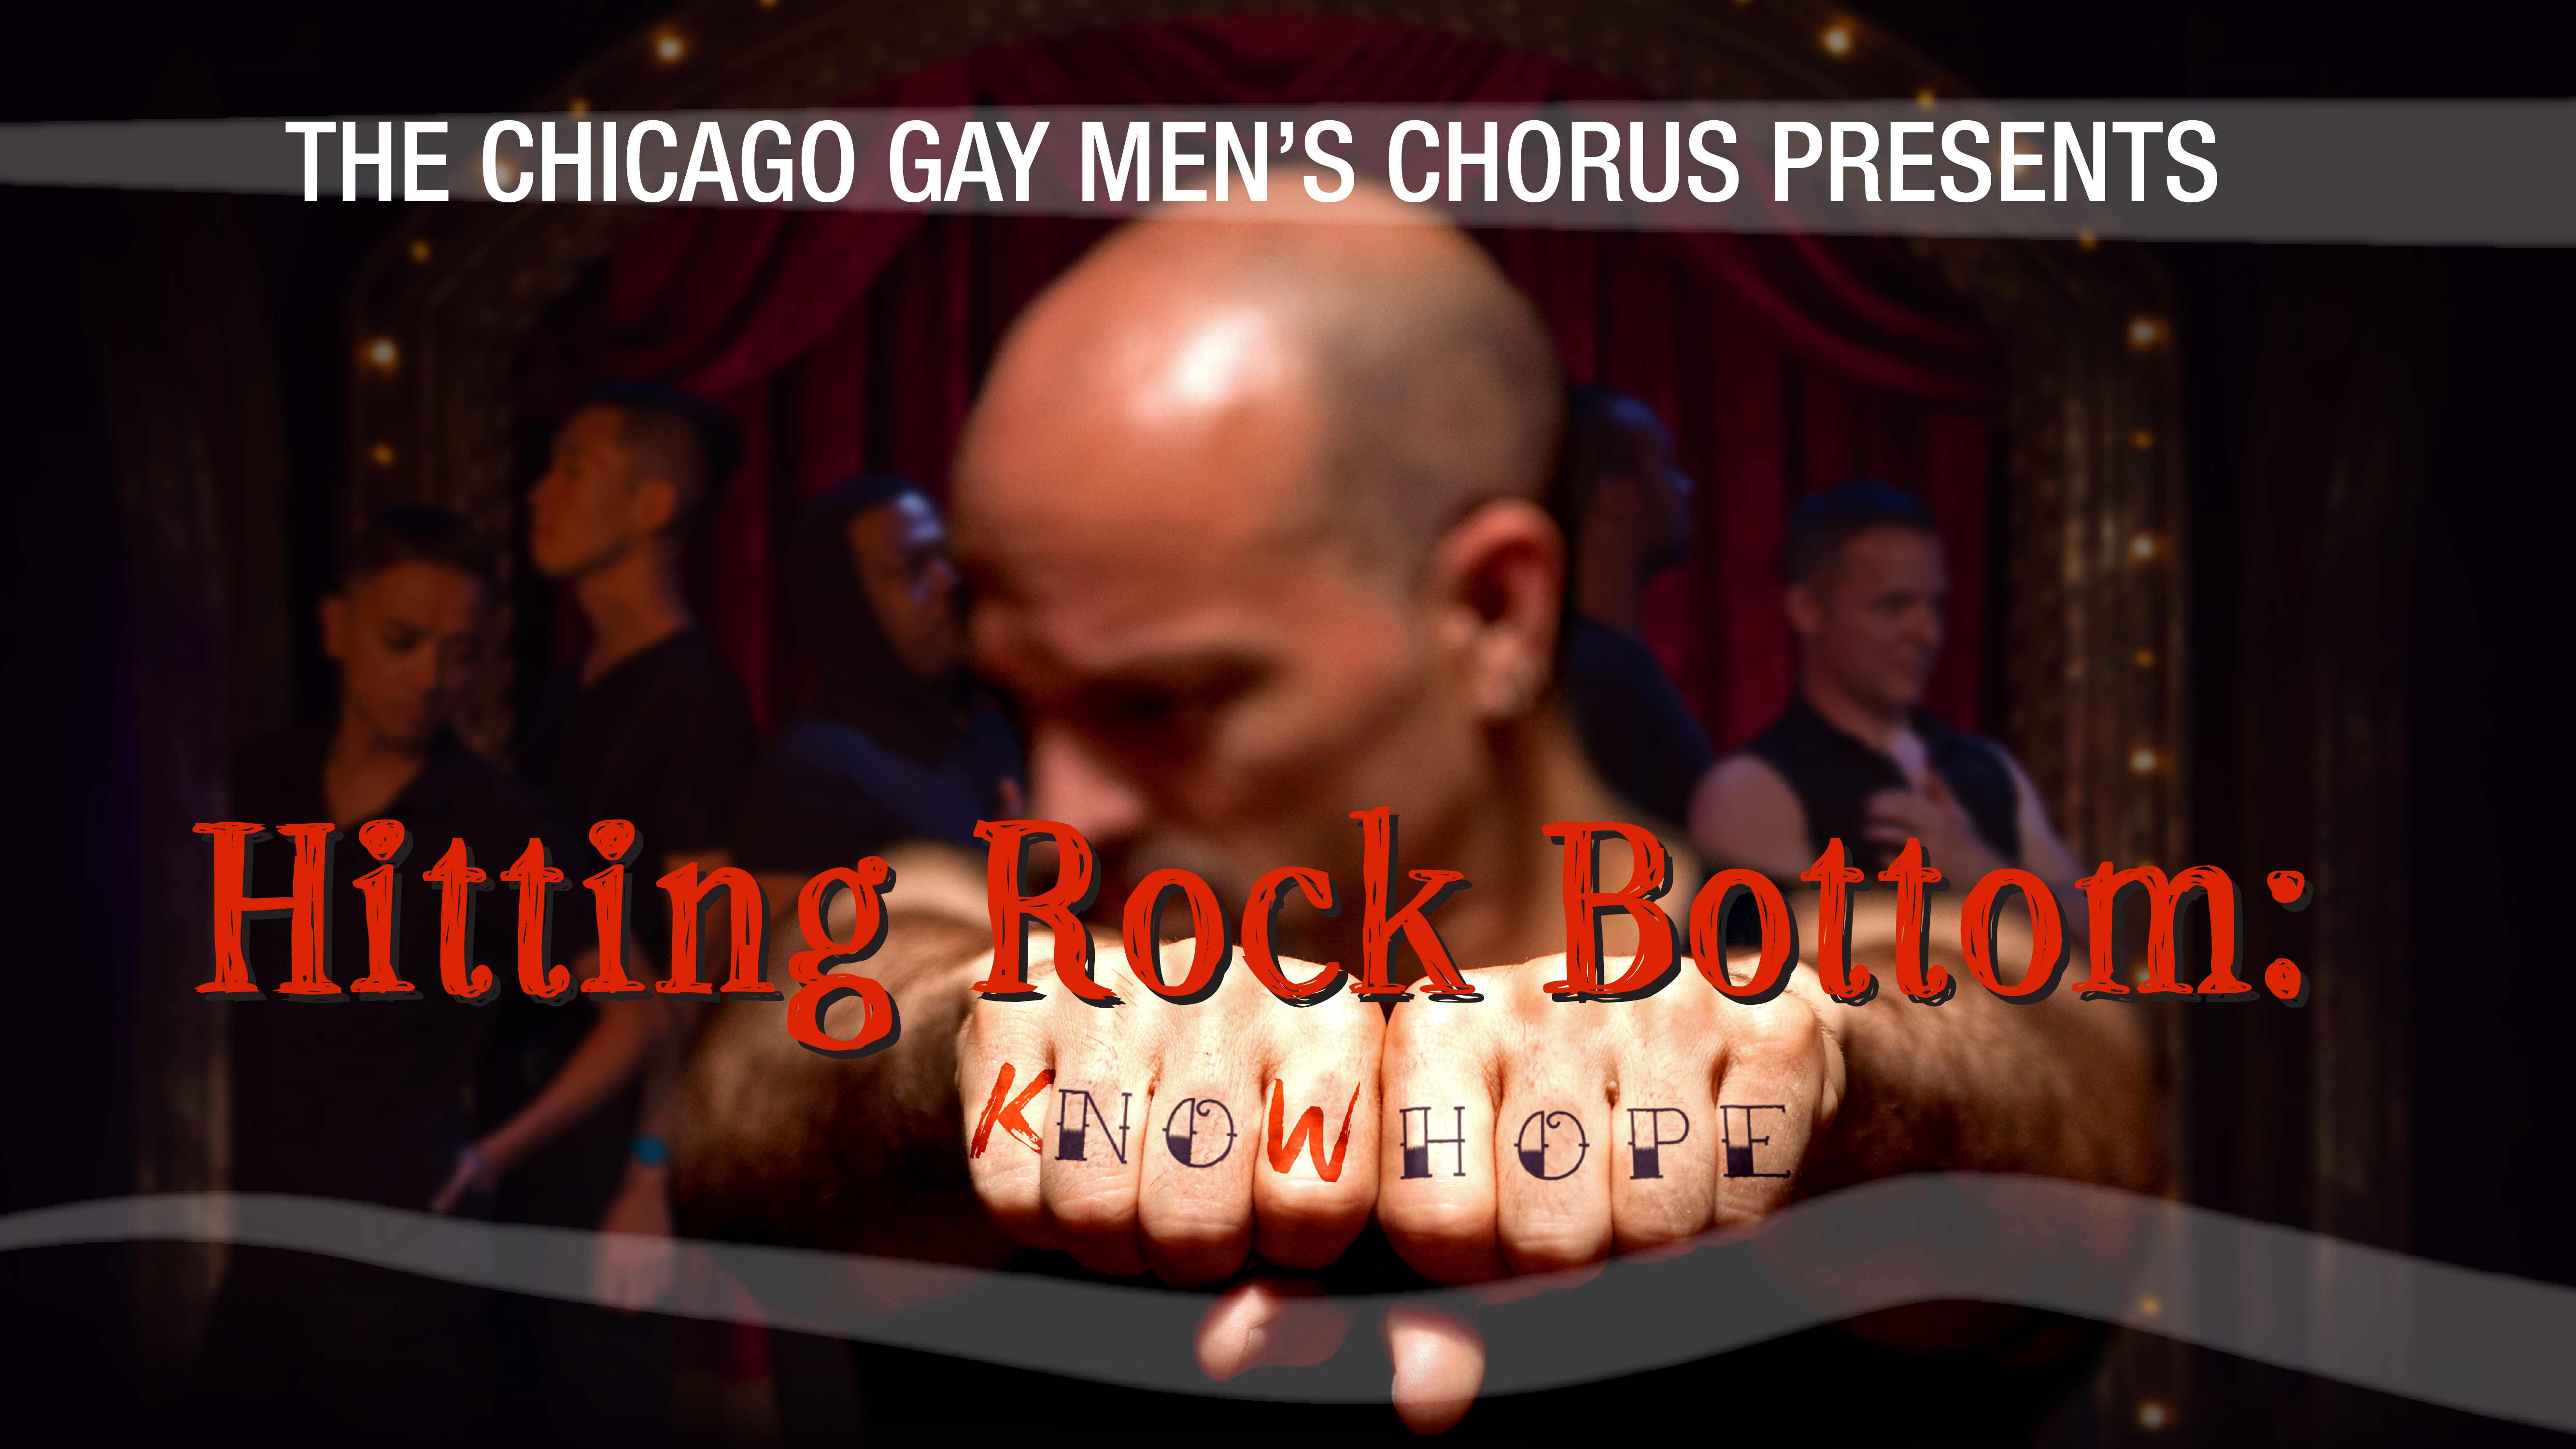 Chicago gay men's chorus to perform miracle on thirty